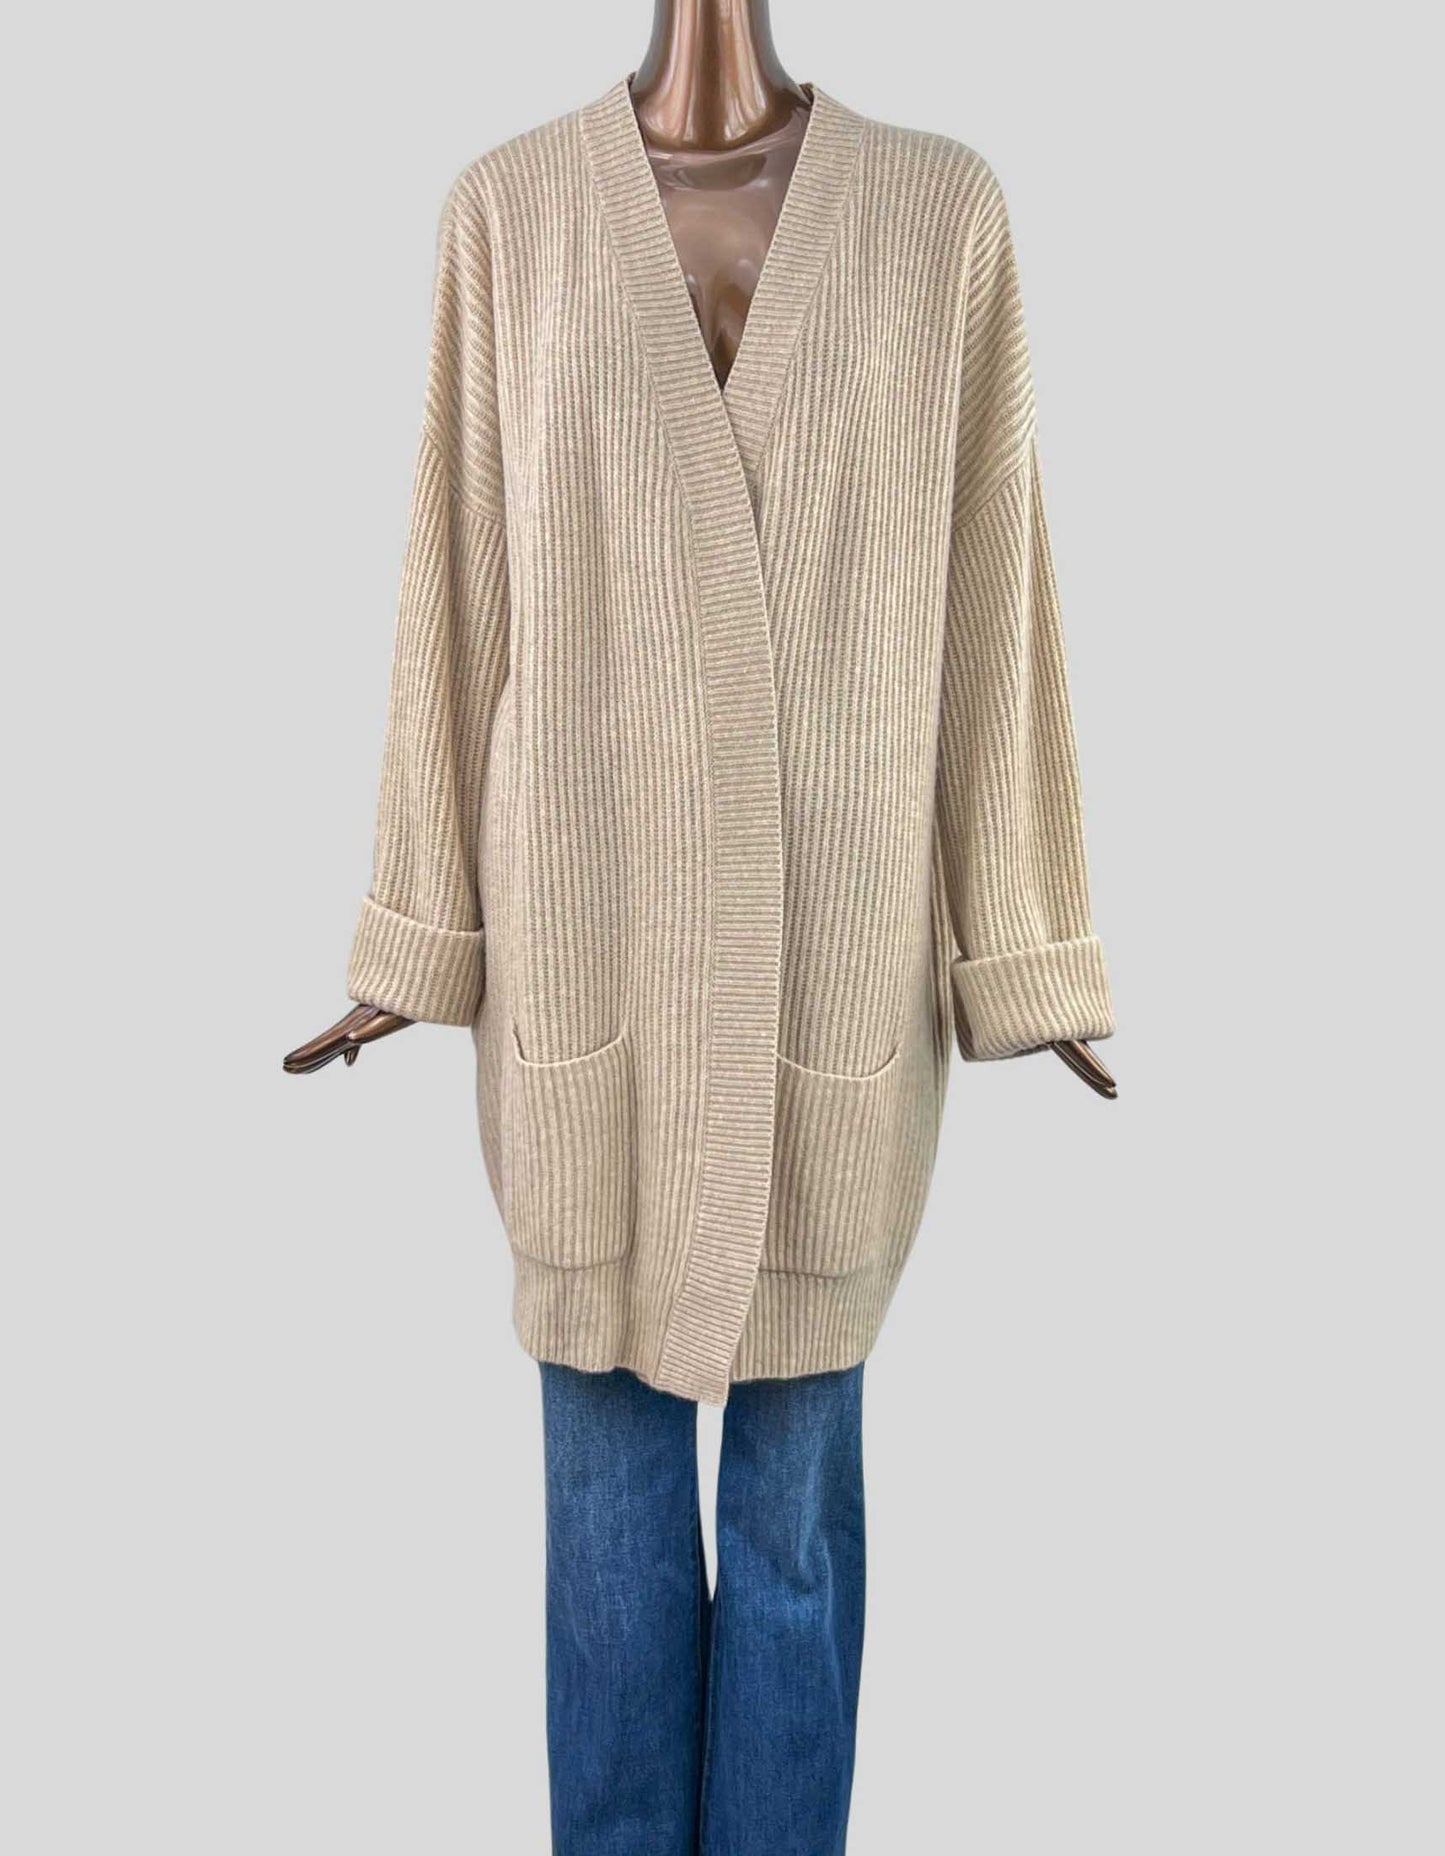 GENTLE HERD 100% Cashmere Ribbed Cardigan With Pockets - Medium